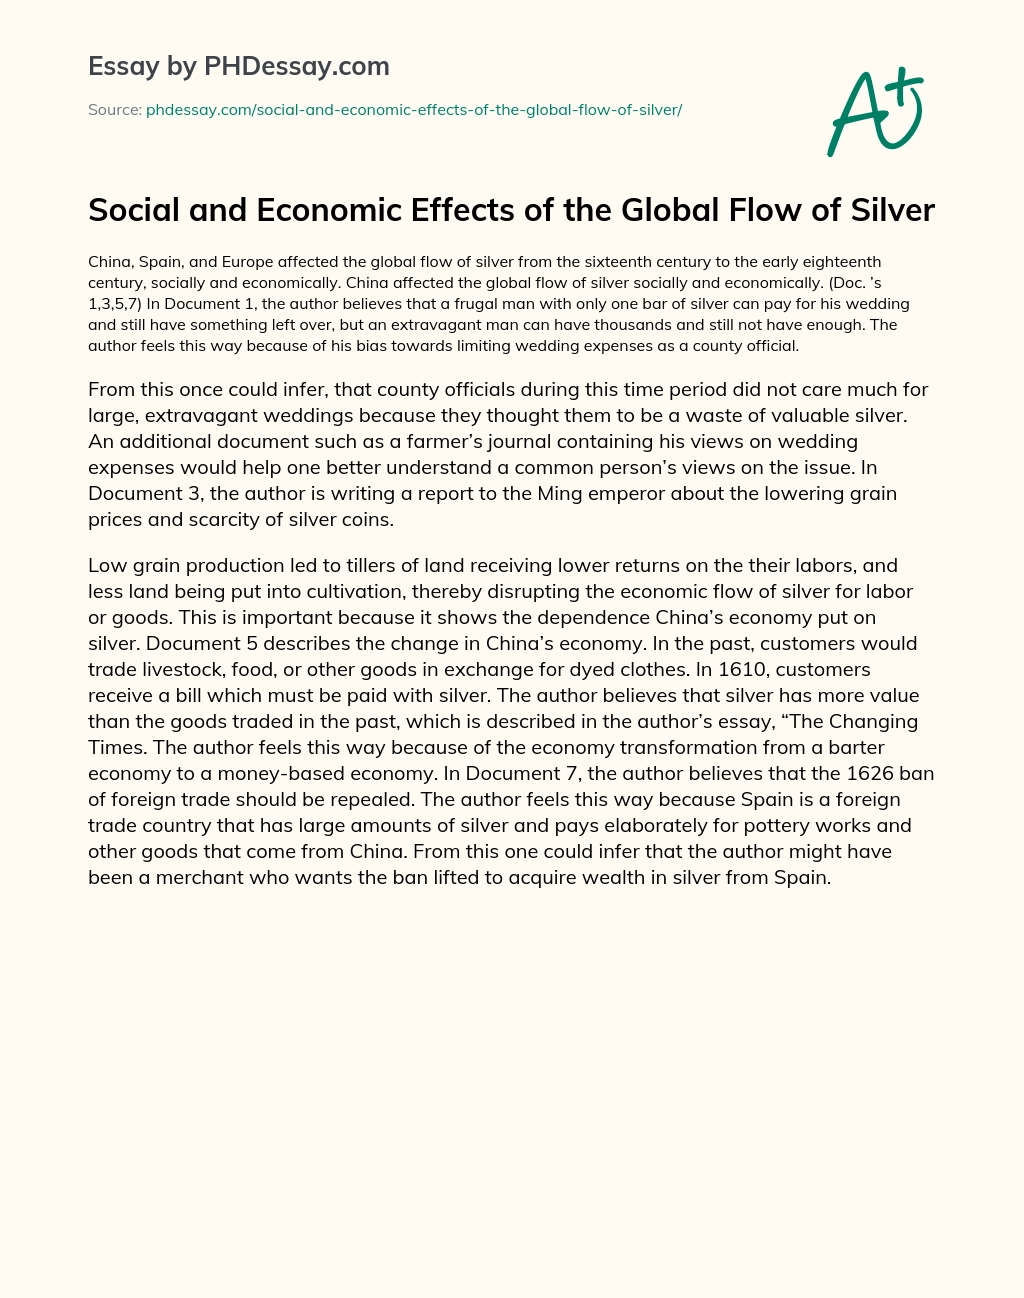 Social and Economic Effects of the Global Flow of Silver essay